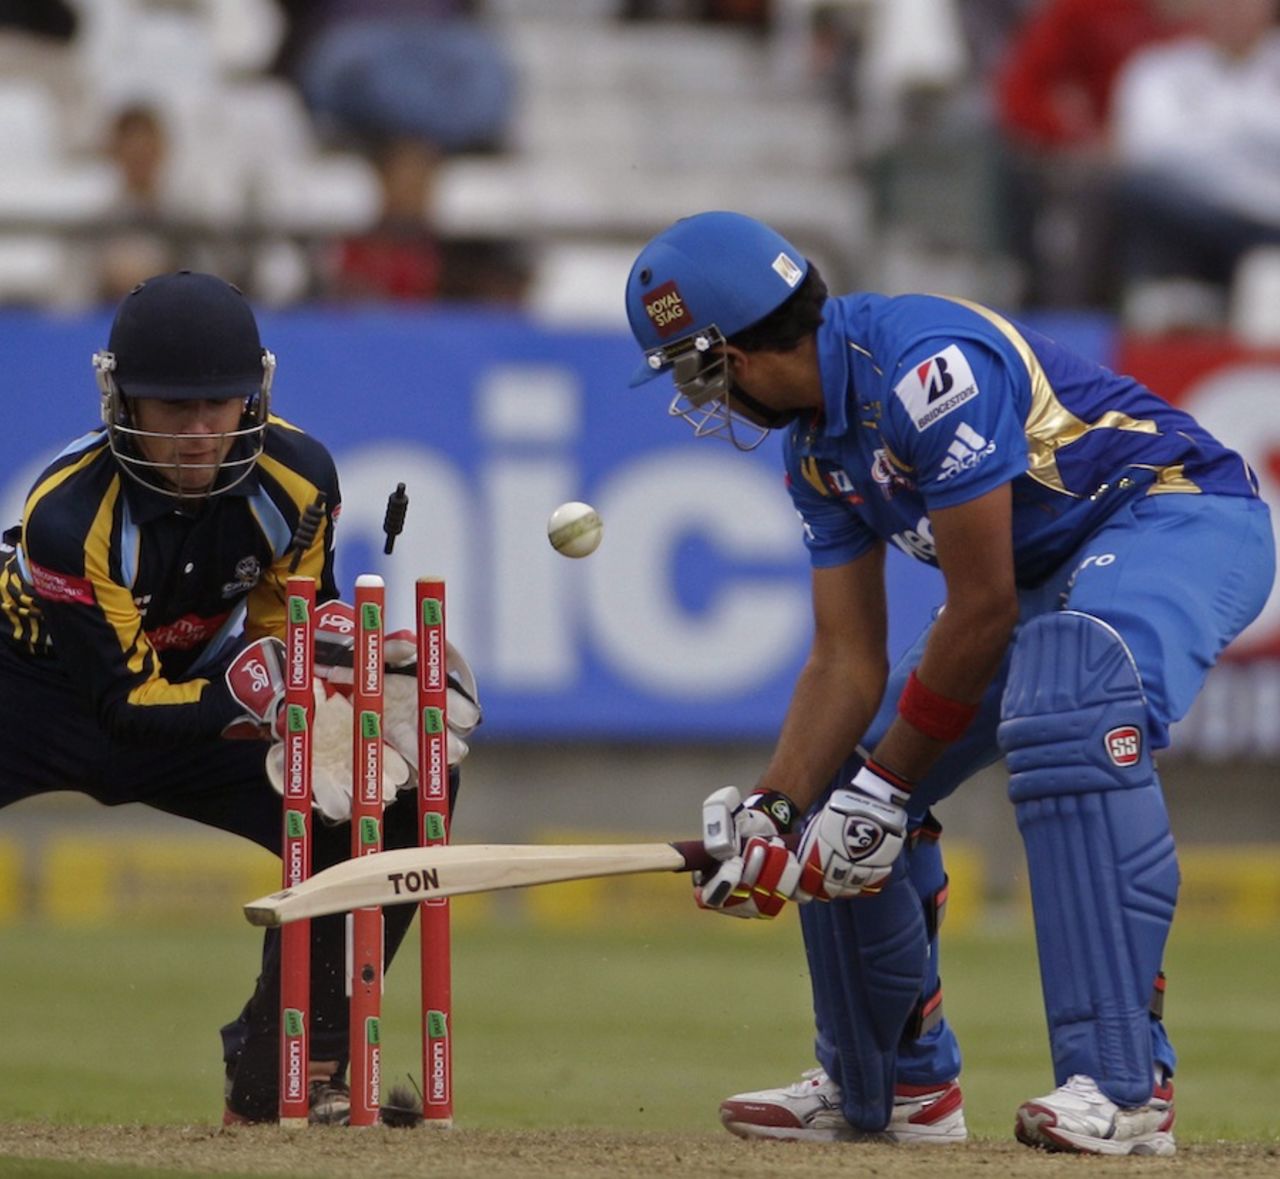 Rohit Sharma was out bowled to Azeem Rafiq, Mumbai Indians v Yorkshire, Group B, Champions League T20, Cape Town, October 18, 2012